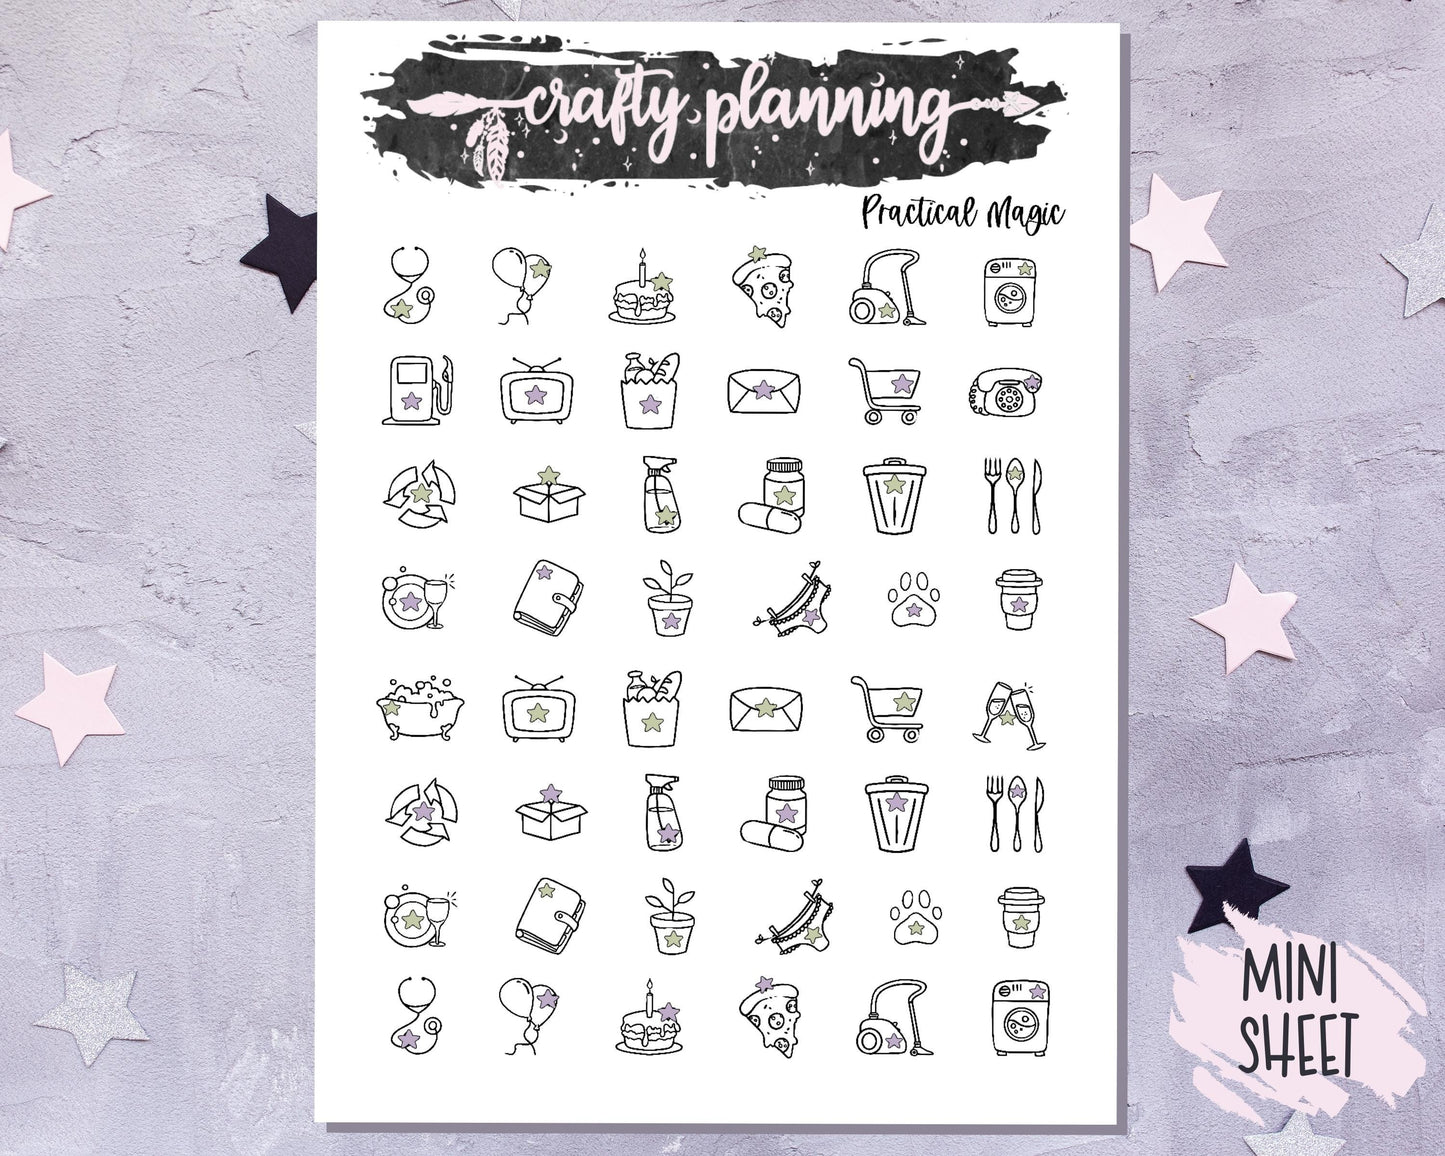 Witchcraft Stickers, Movie Stickers, Weekly Planner Kit, Vertical Planner Kit, Planner Stickers, Esoteric Stickers, Witchy Stickers